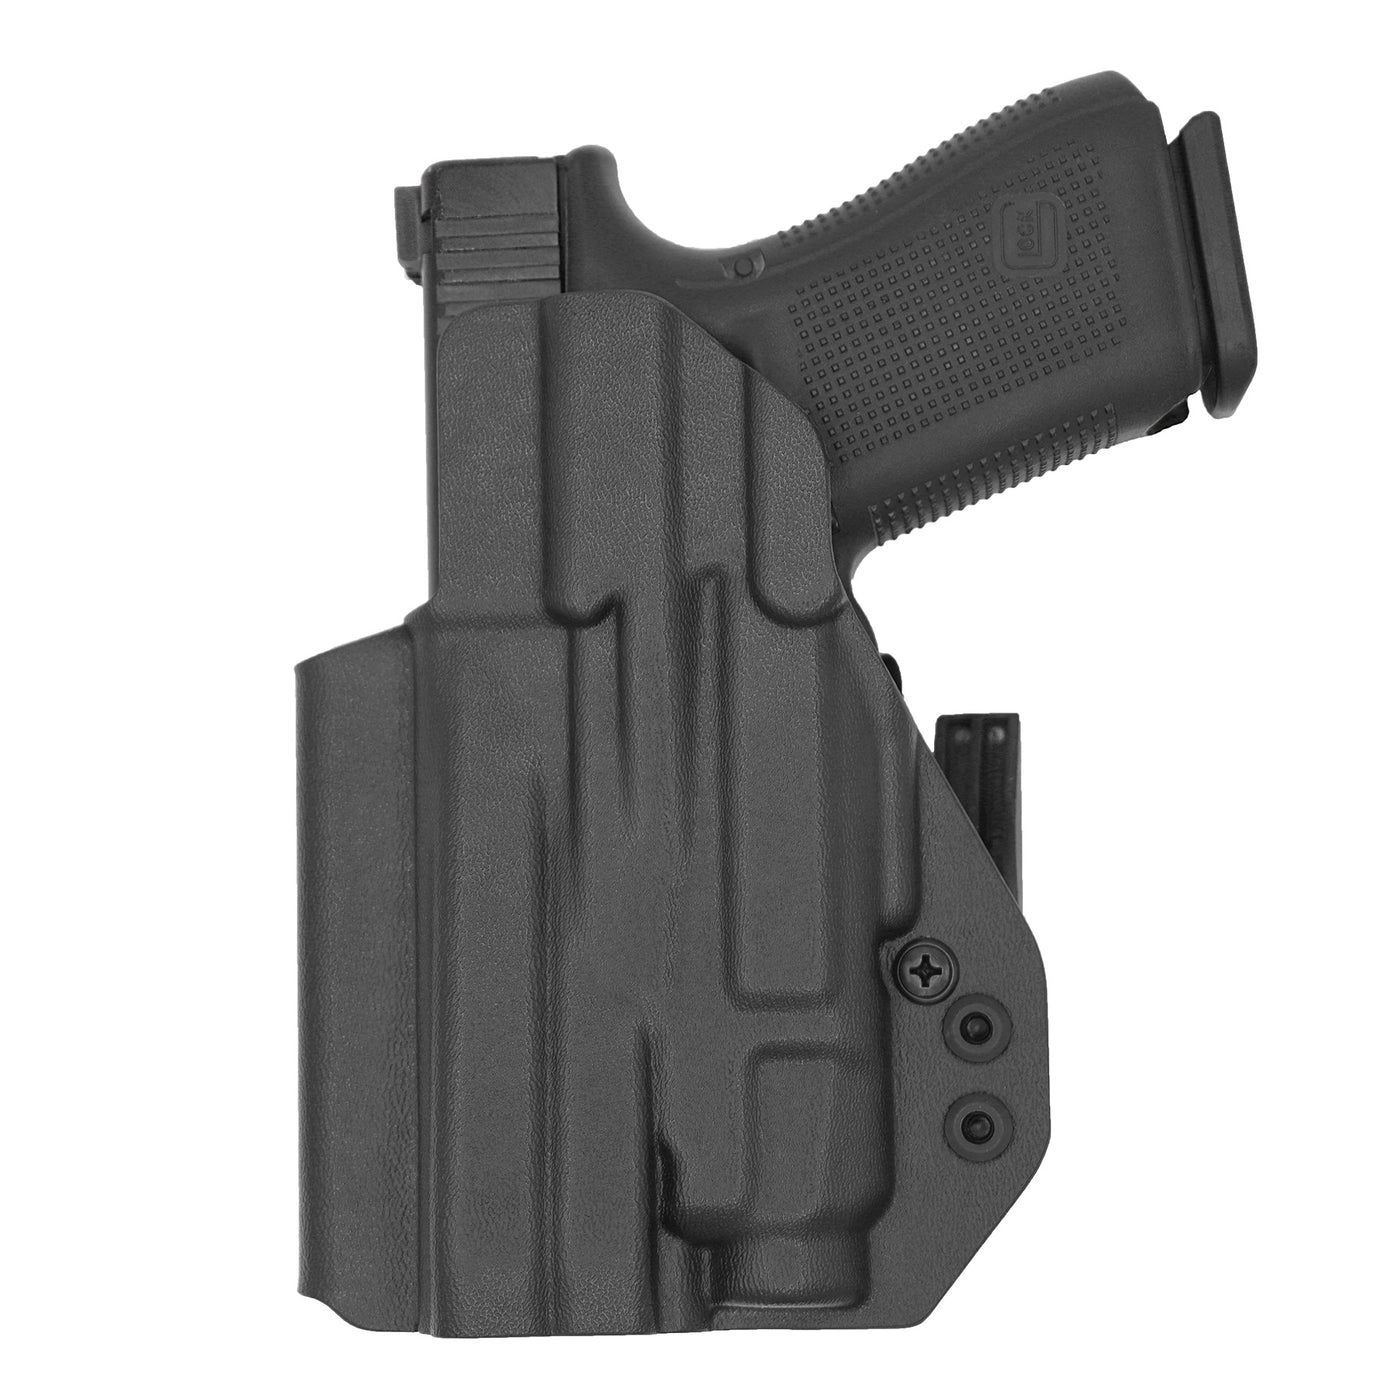 C&G Holsters quickship IWB ALPHA UPGRADE Tactical OZ9/c streamlight tlr7/a in holstered position back view